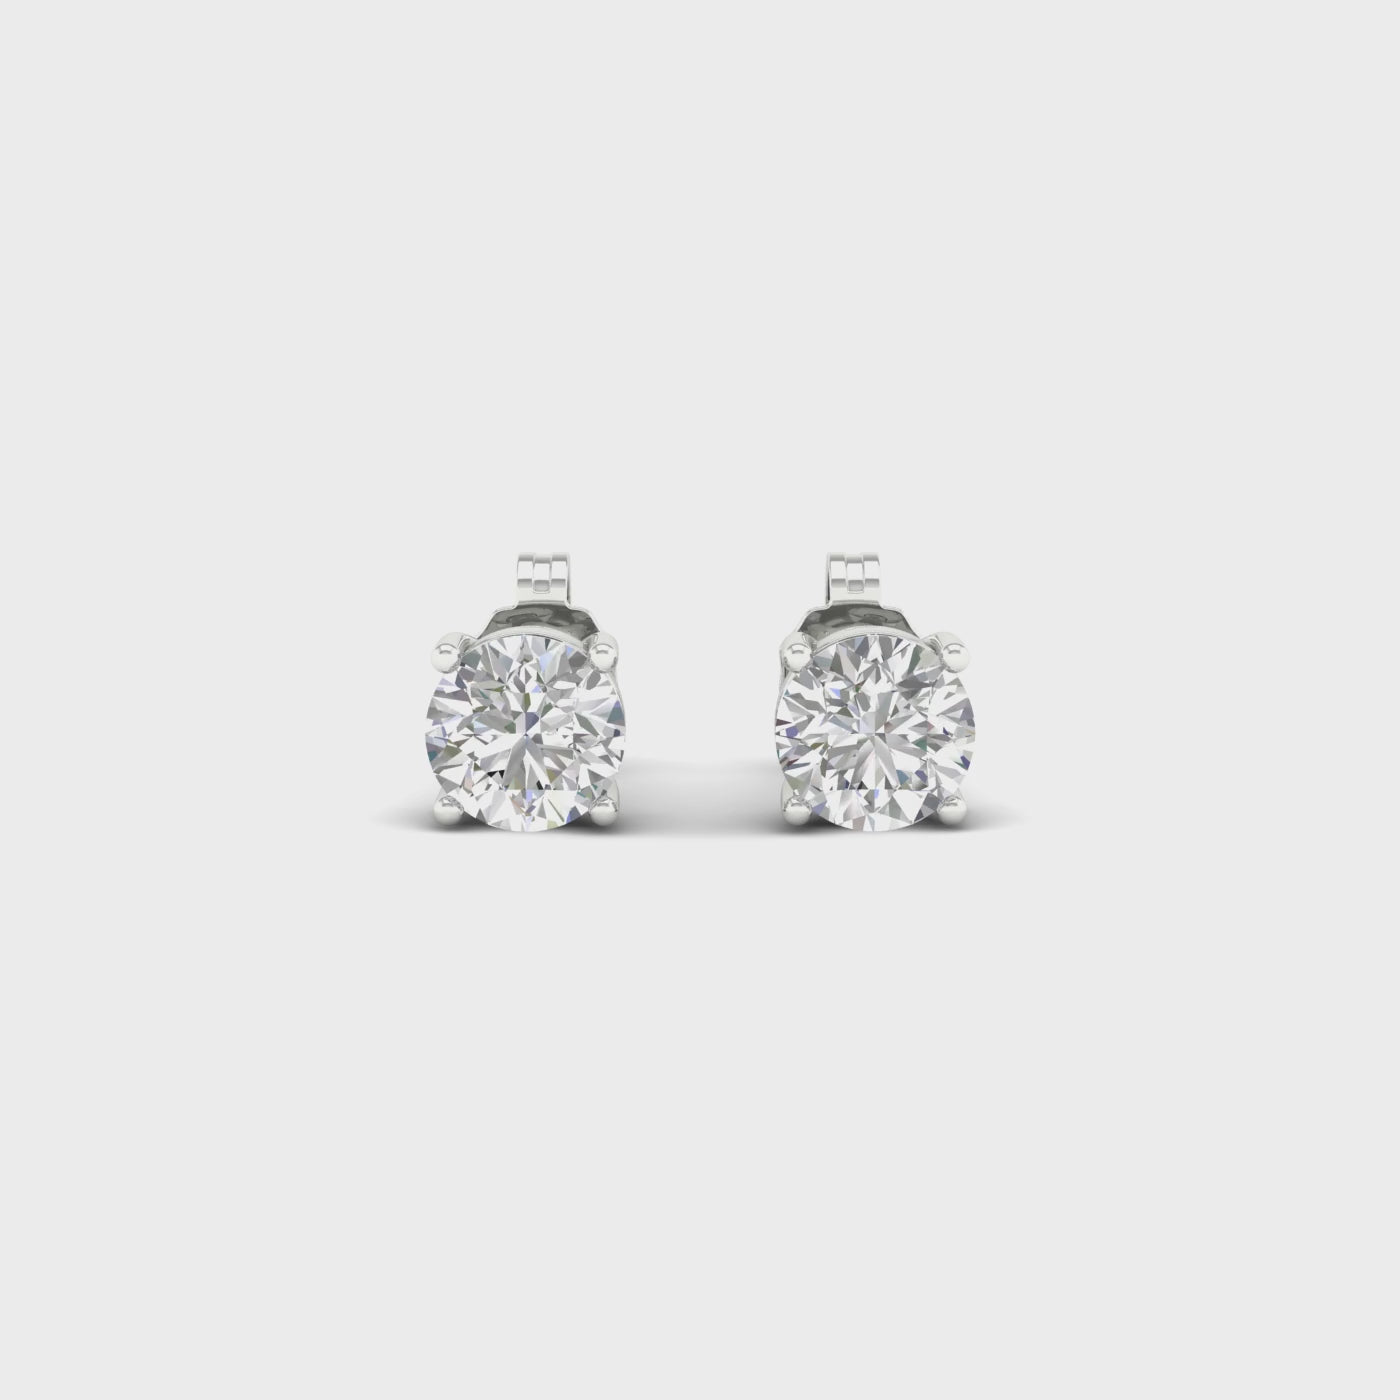 1 ½ Carat Round Lab Grown Diamond 14K Gold Solitaire Stud Earrings